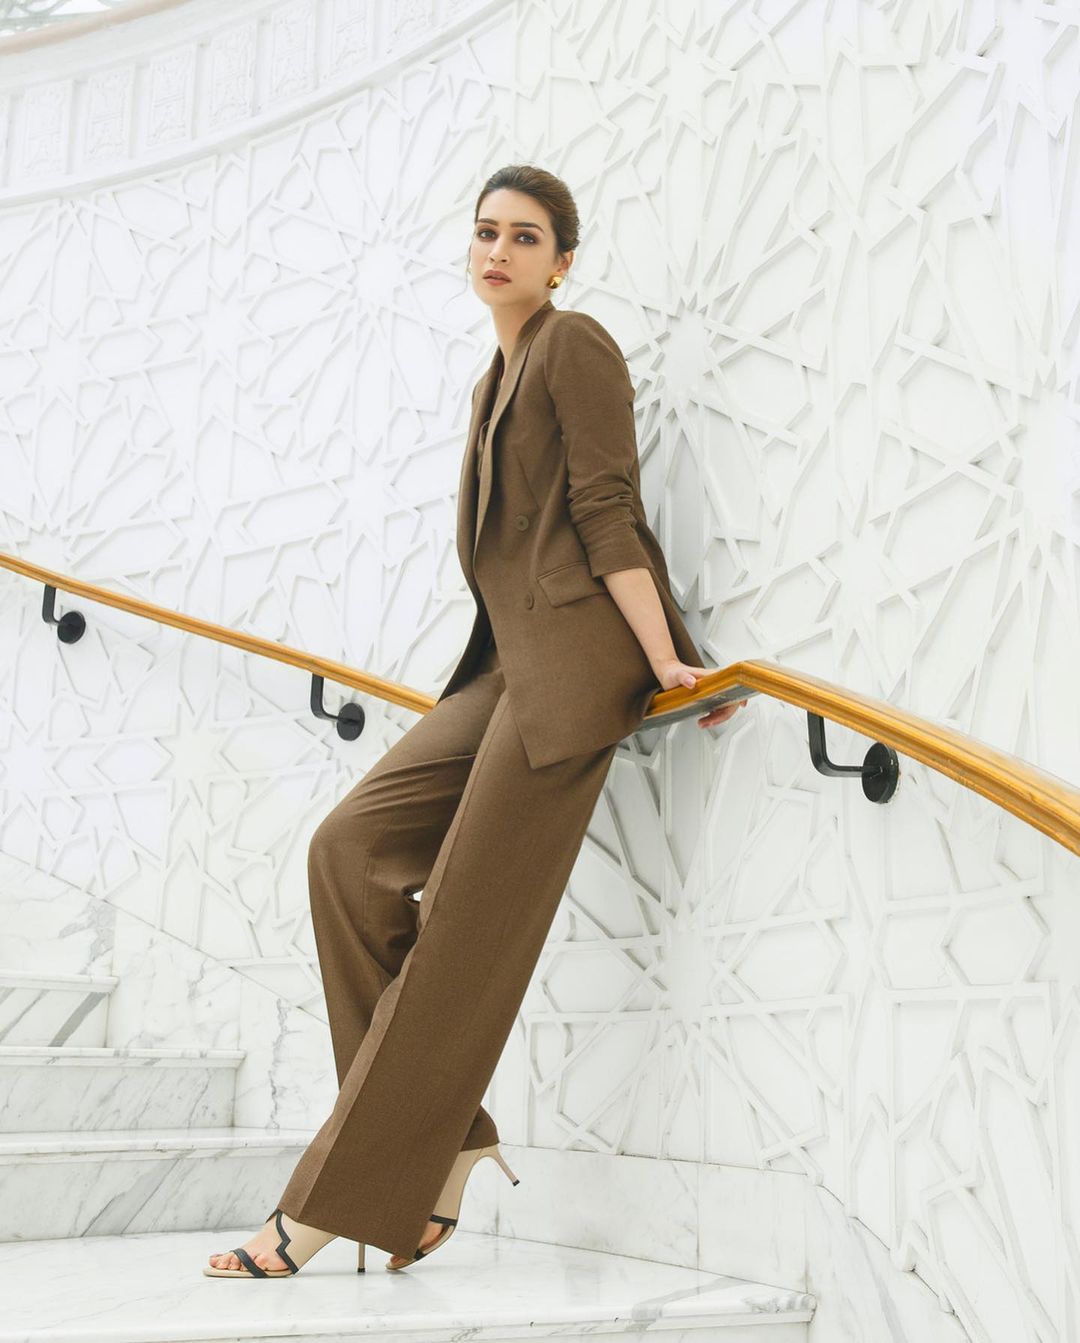 Kriti Sanon is the definition of grace in the pantsuit